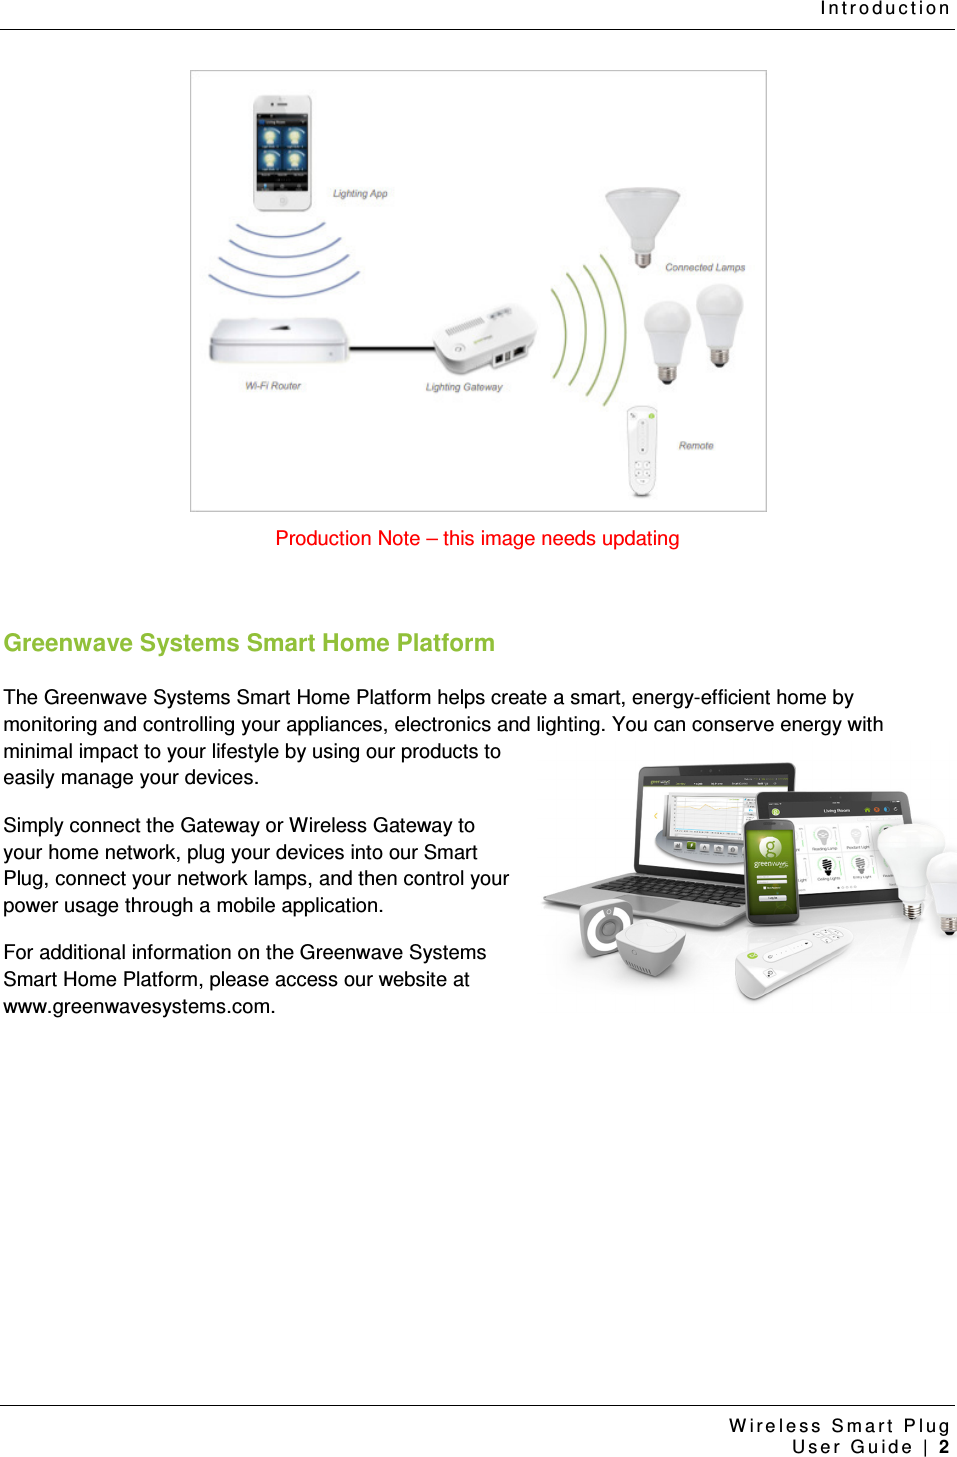 I n t r o d u c t i o n  W i r e l e s s   S m a r t   P l u g    U s e r   G u i d e   |   2   Production Note – this image needs updating  Greenwave Systems Smart Home Platform The Greenwave Systems Smart Home Platform helps create a smart, energy-efficient home by monitoring and controlling your appliances, electronics and lighting. You can conserve energy with minimal impact to your lifestyle by using our products to easily manage your devices.  Simply connect the Gateway or Wireless Gateway to your home network, plug your devices into our Smart Plug, connect your network lamps, and then control your power usage through a mobile application. For additional information on the Greenwave Systems Smart Home Platform, please access our website at www.greenwavesystems.com.    